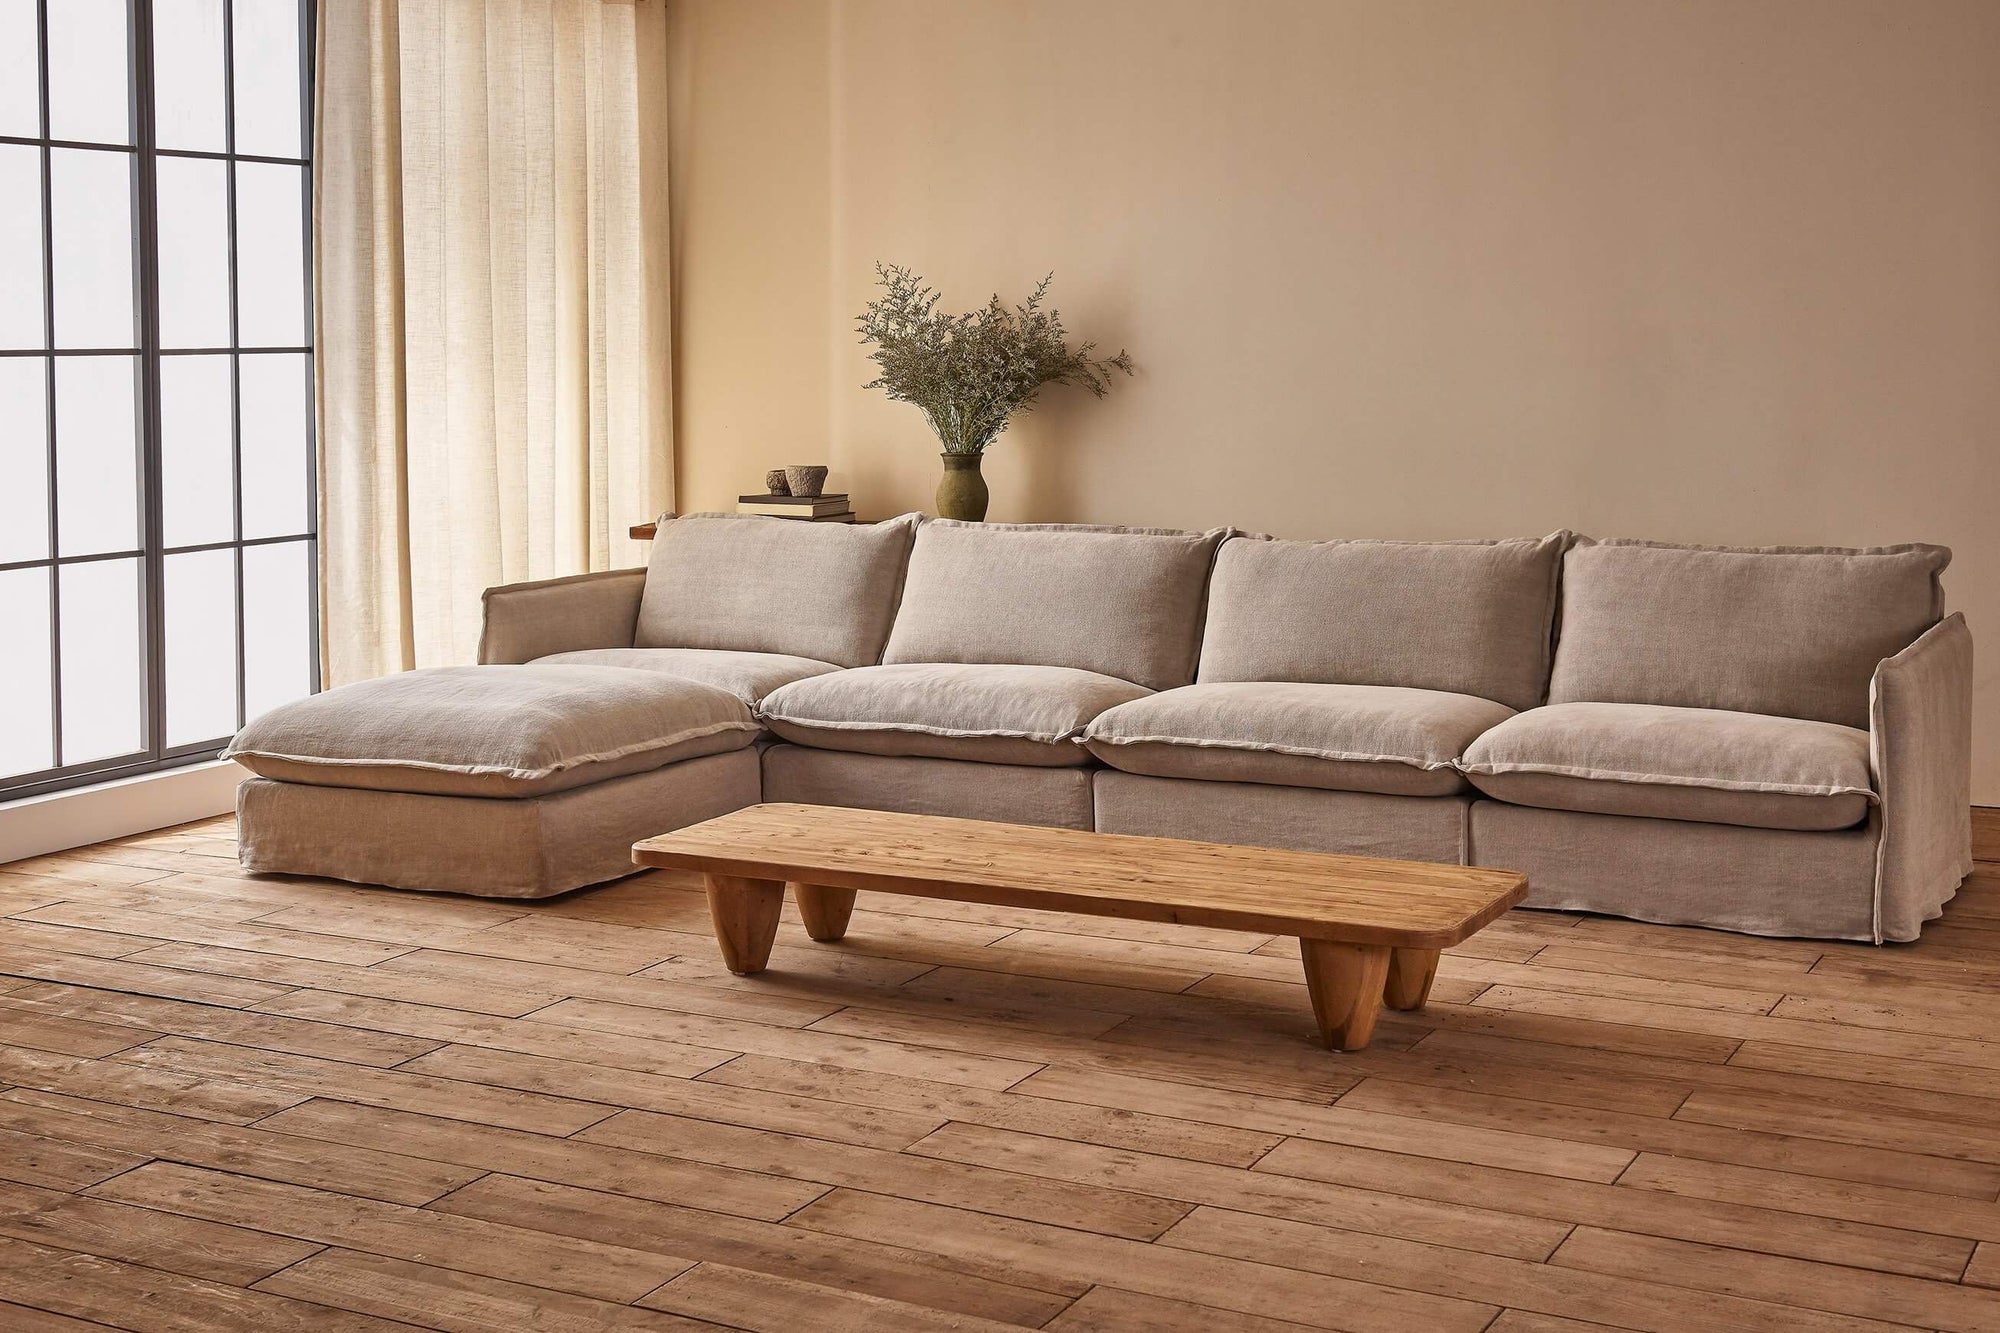 Neva 5-piece Chaise Sectional Sofa in Jasmine Rice, a light warm greige Medium Weight Linen, placed in a warmly lit room with a Theo Coffee Table, in front of a decorated console table